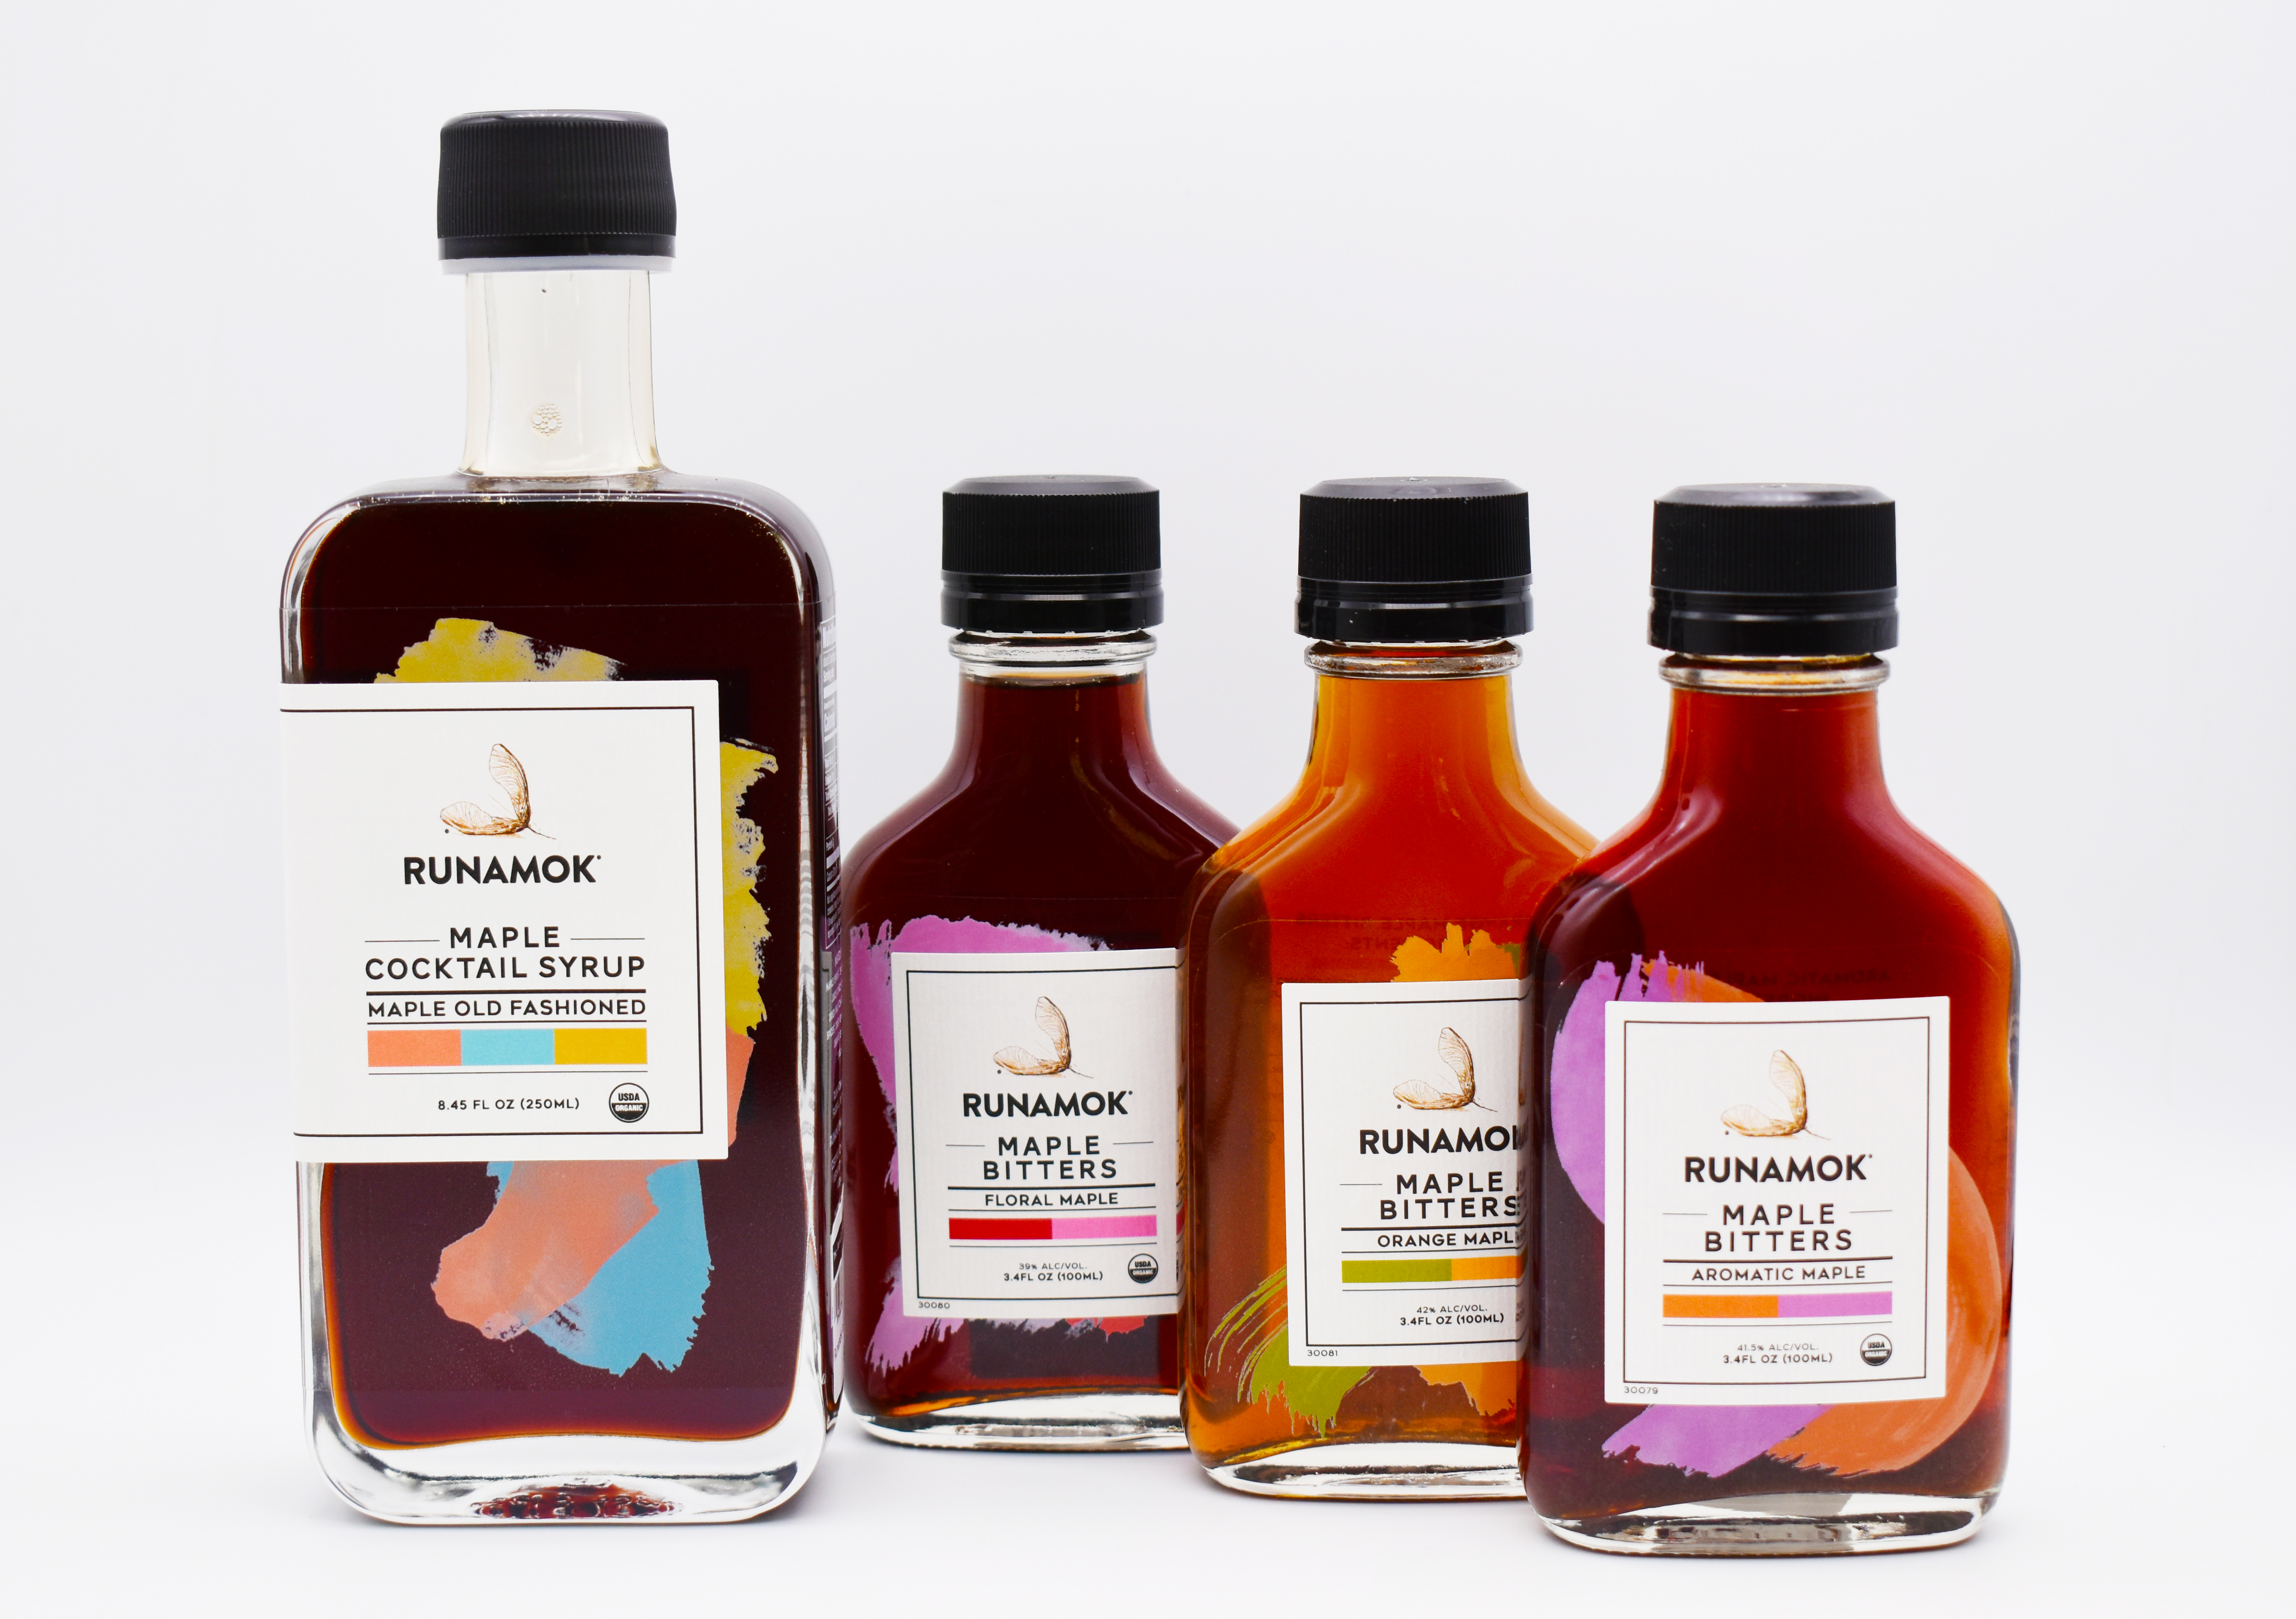 Product Image for Runamok Cardamon Infused Maple Syrup